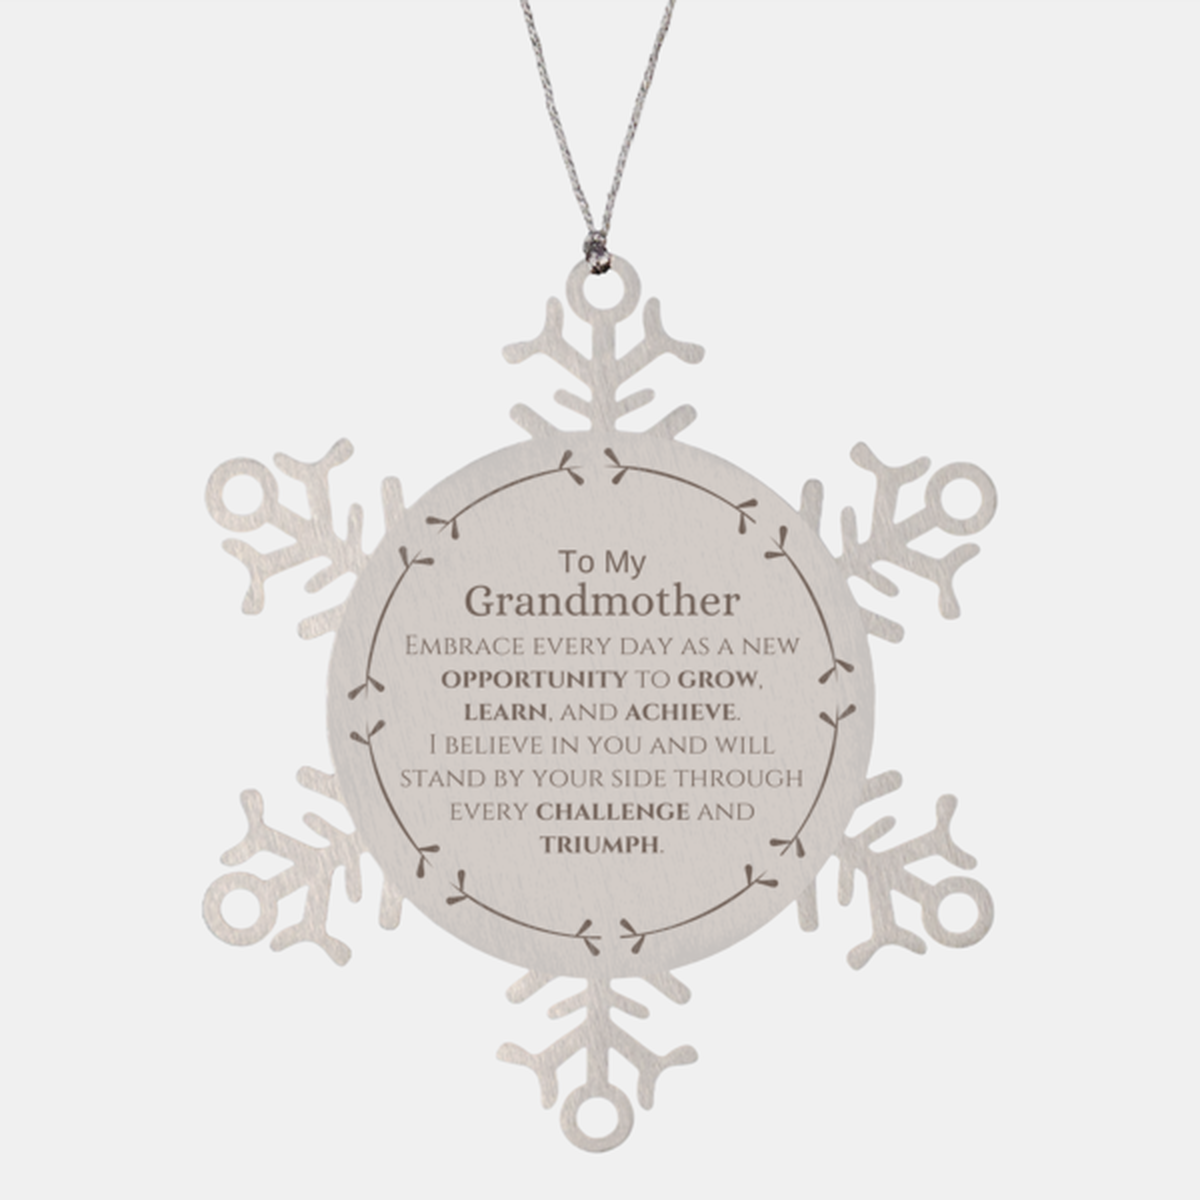 To My Grandmother Gifts, I believe in you and will stand by your side, Inspirational Snowflake Ornament For Grandmother, Birthday Christmas Motivational Grandmother Gifts